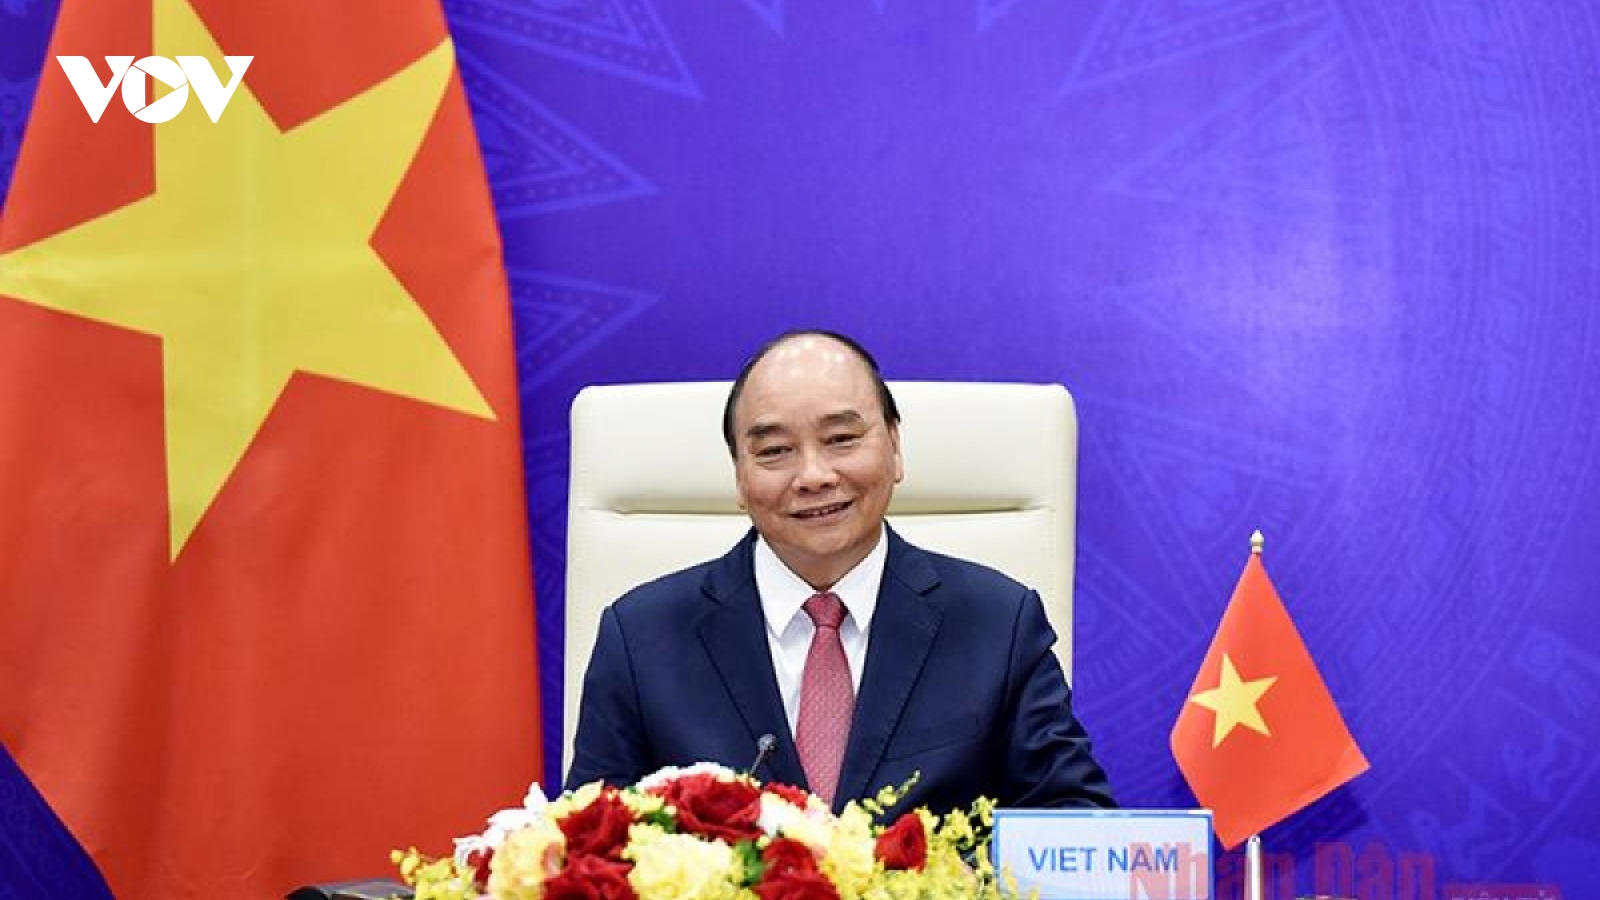 President Nguyen Xuan Phuc to pay official visit to Cuba